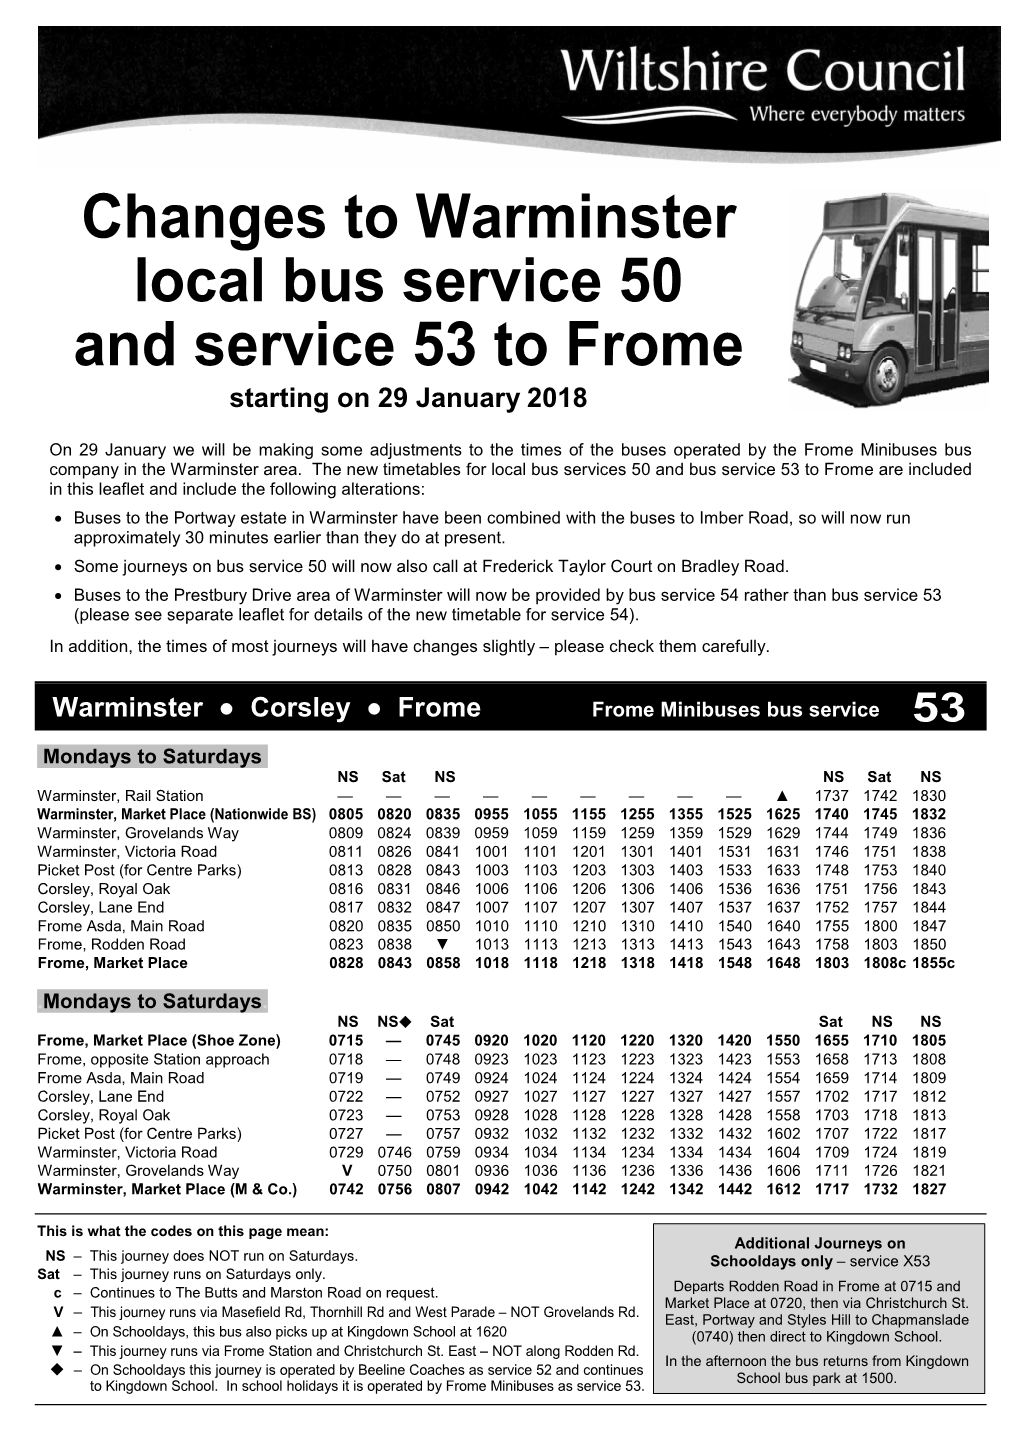 Changes to Warminster Local Bus Service 50 and Service 53 to Frome